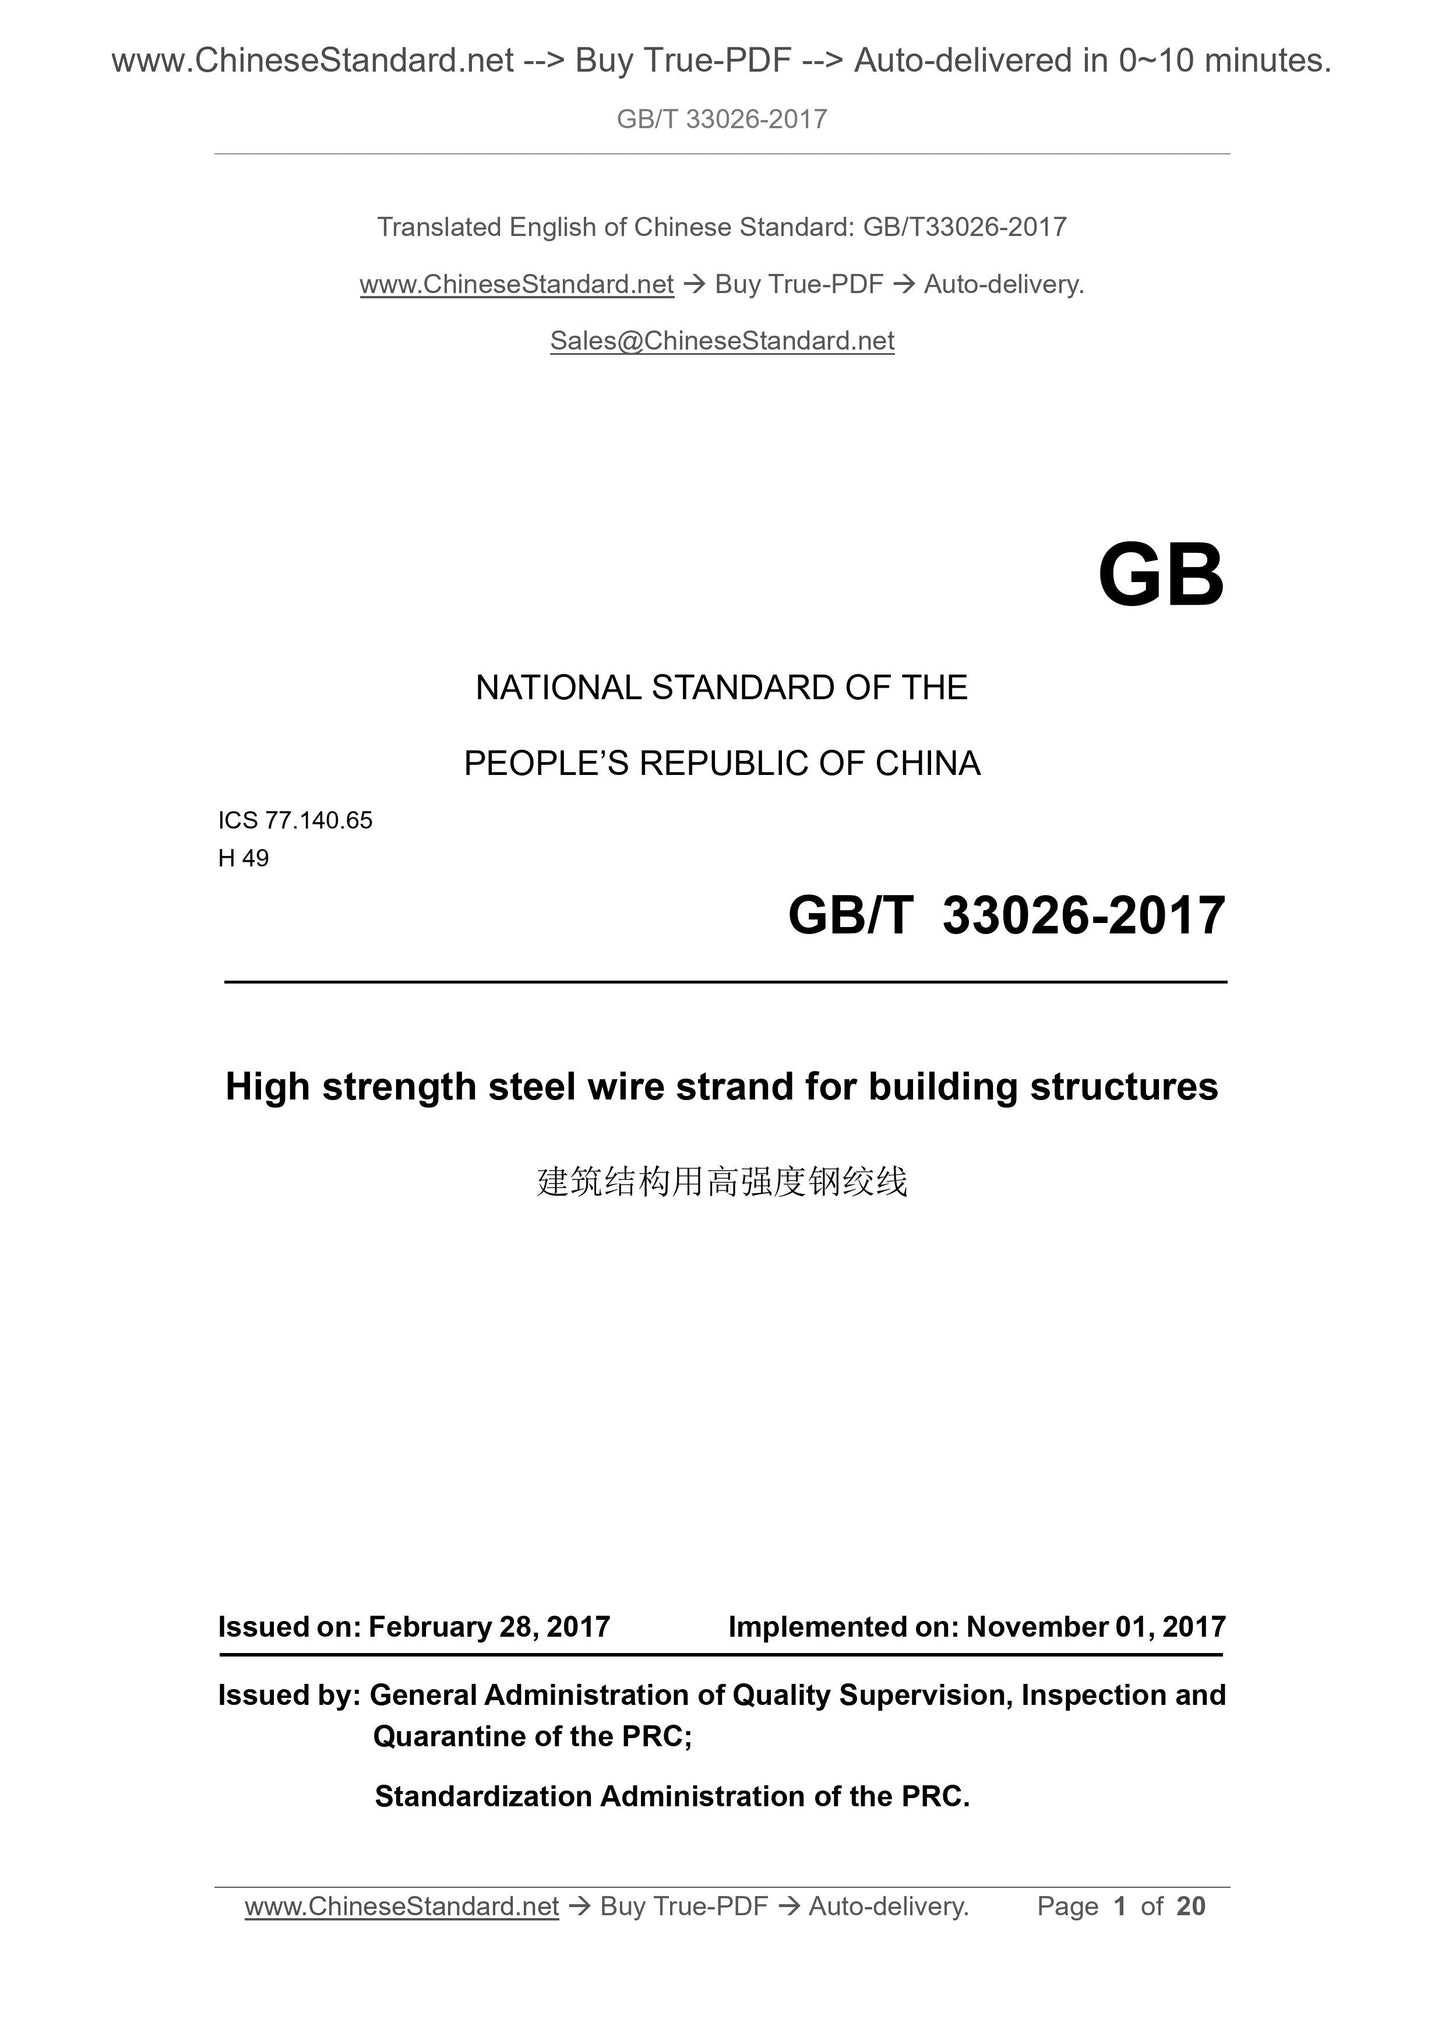 GB/T 33026-2017 Page 1